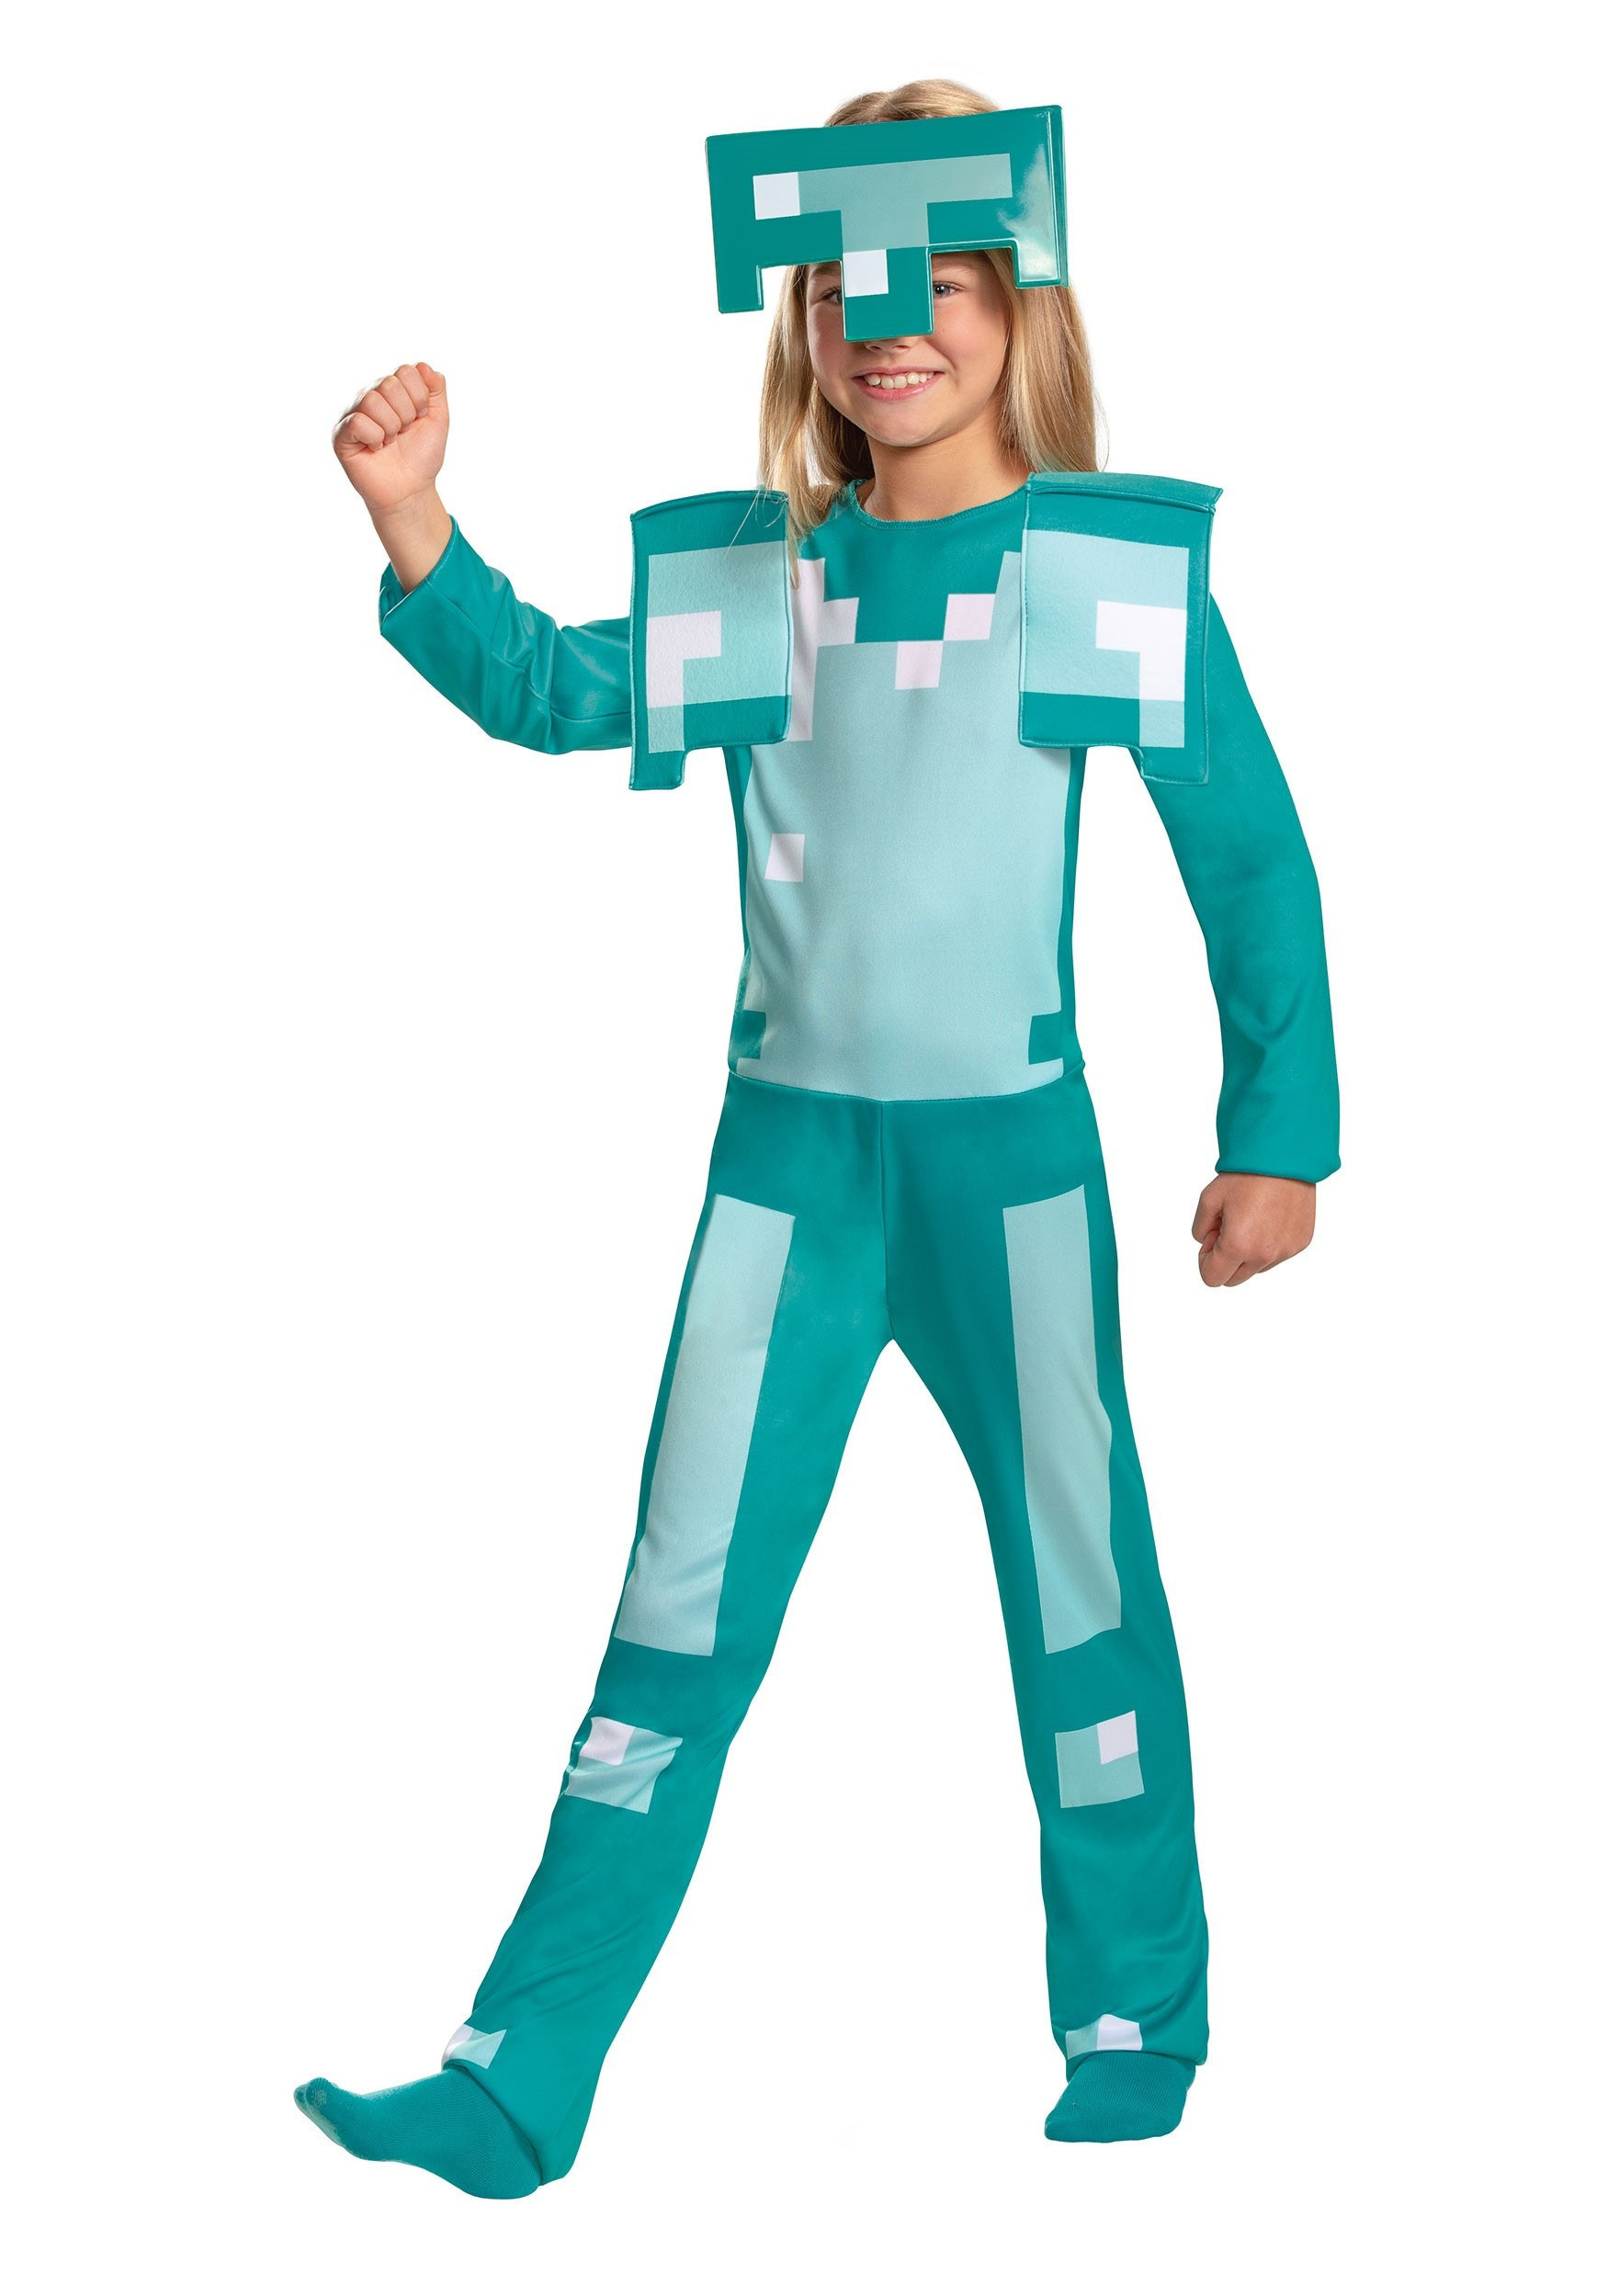 Halloween Costumes Ideas 2020
 100 Best Halloween Costumes For Adults & Kids in 2019